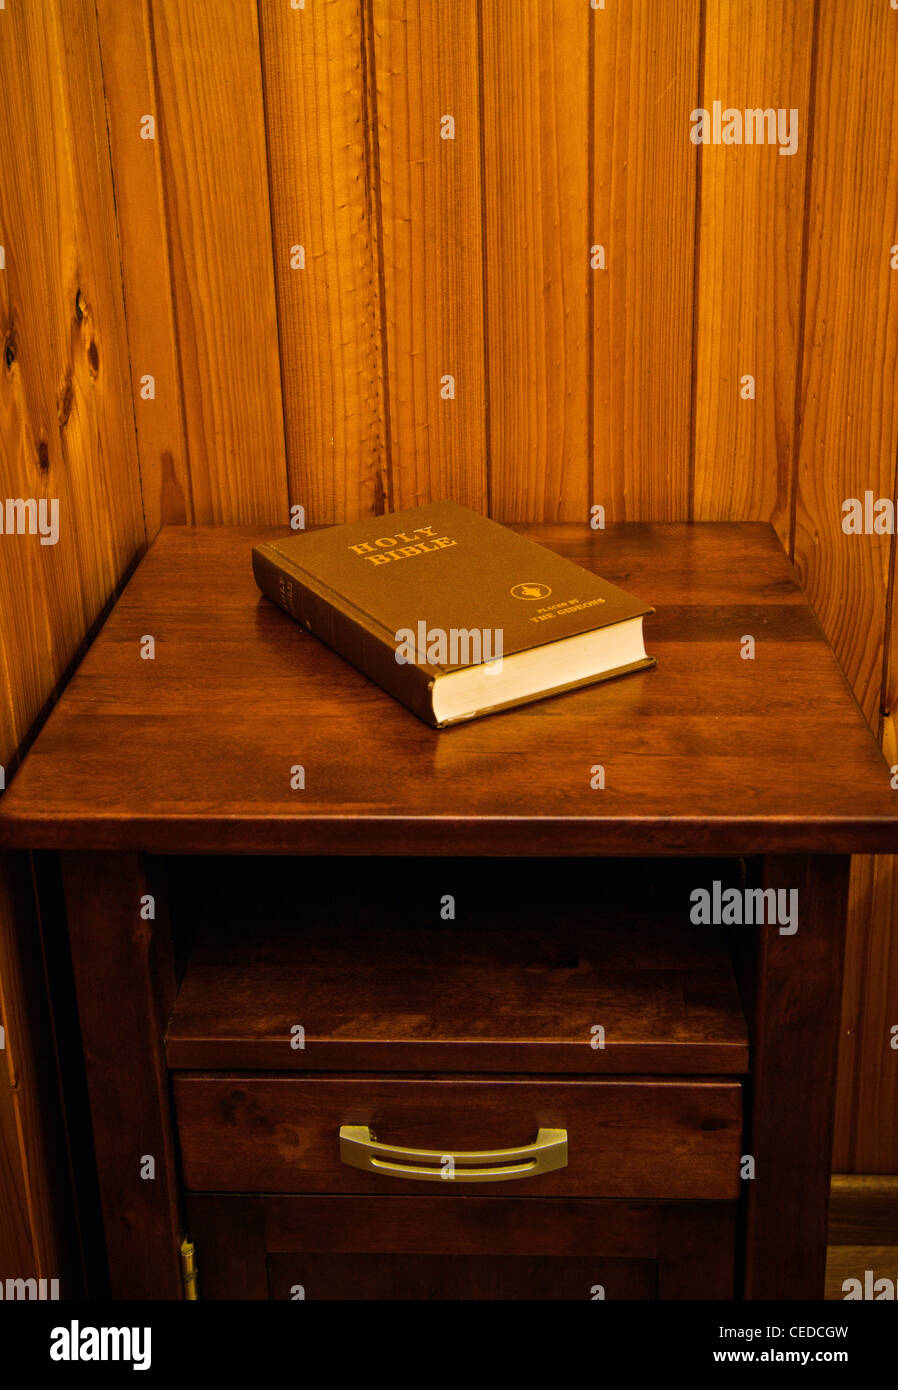 bible on bed side table in cheap hotel room Stock Photo